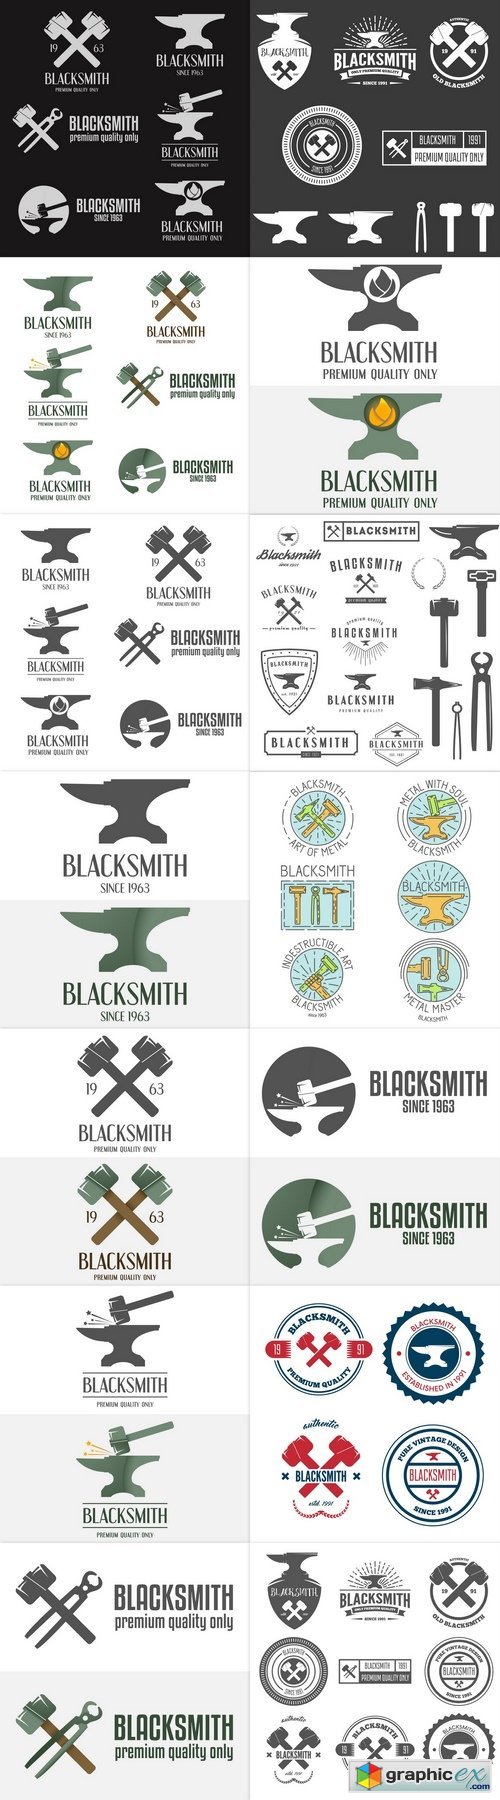 Collection of logo, elements or logotypes for blacksmith and shop